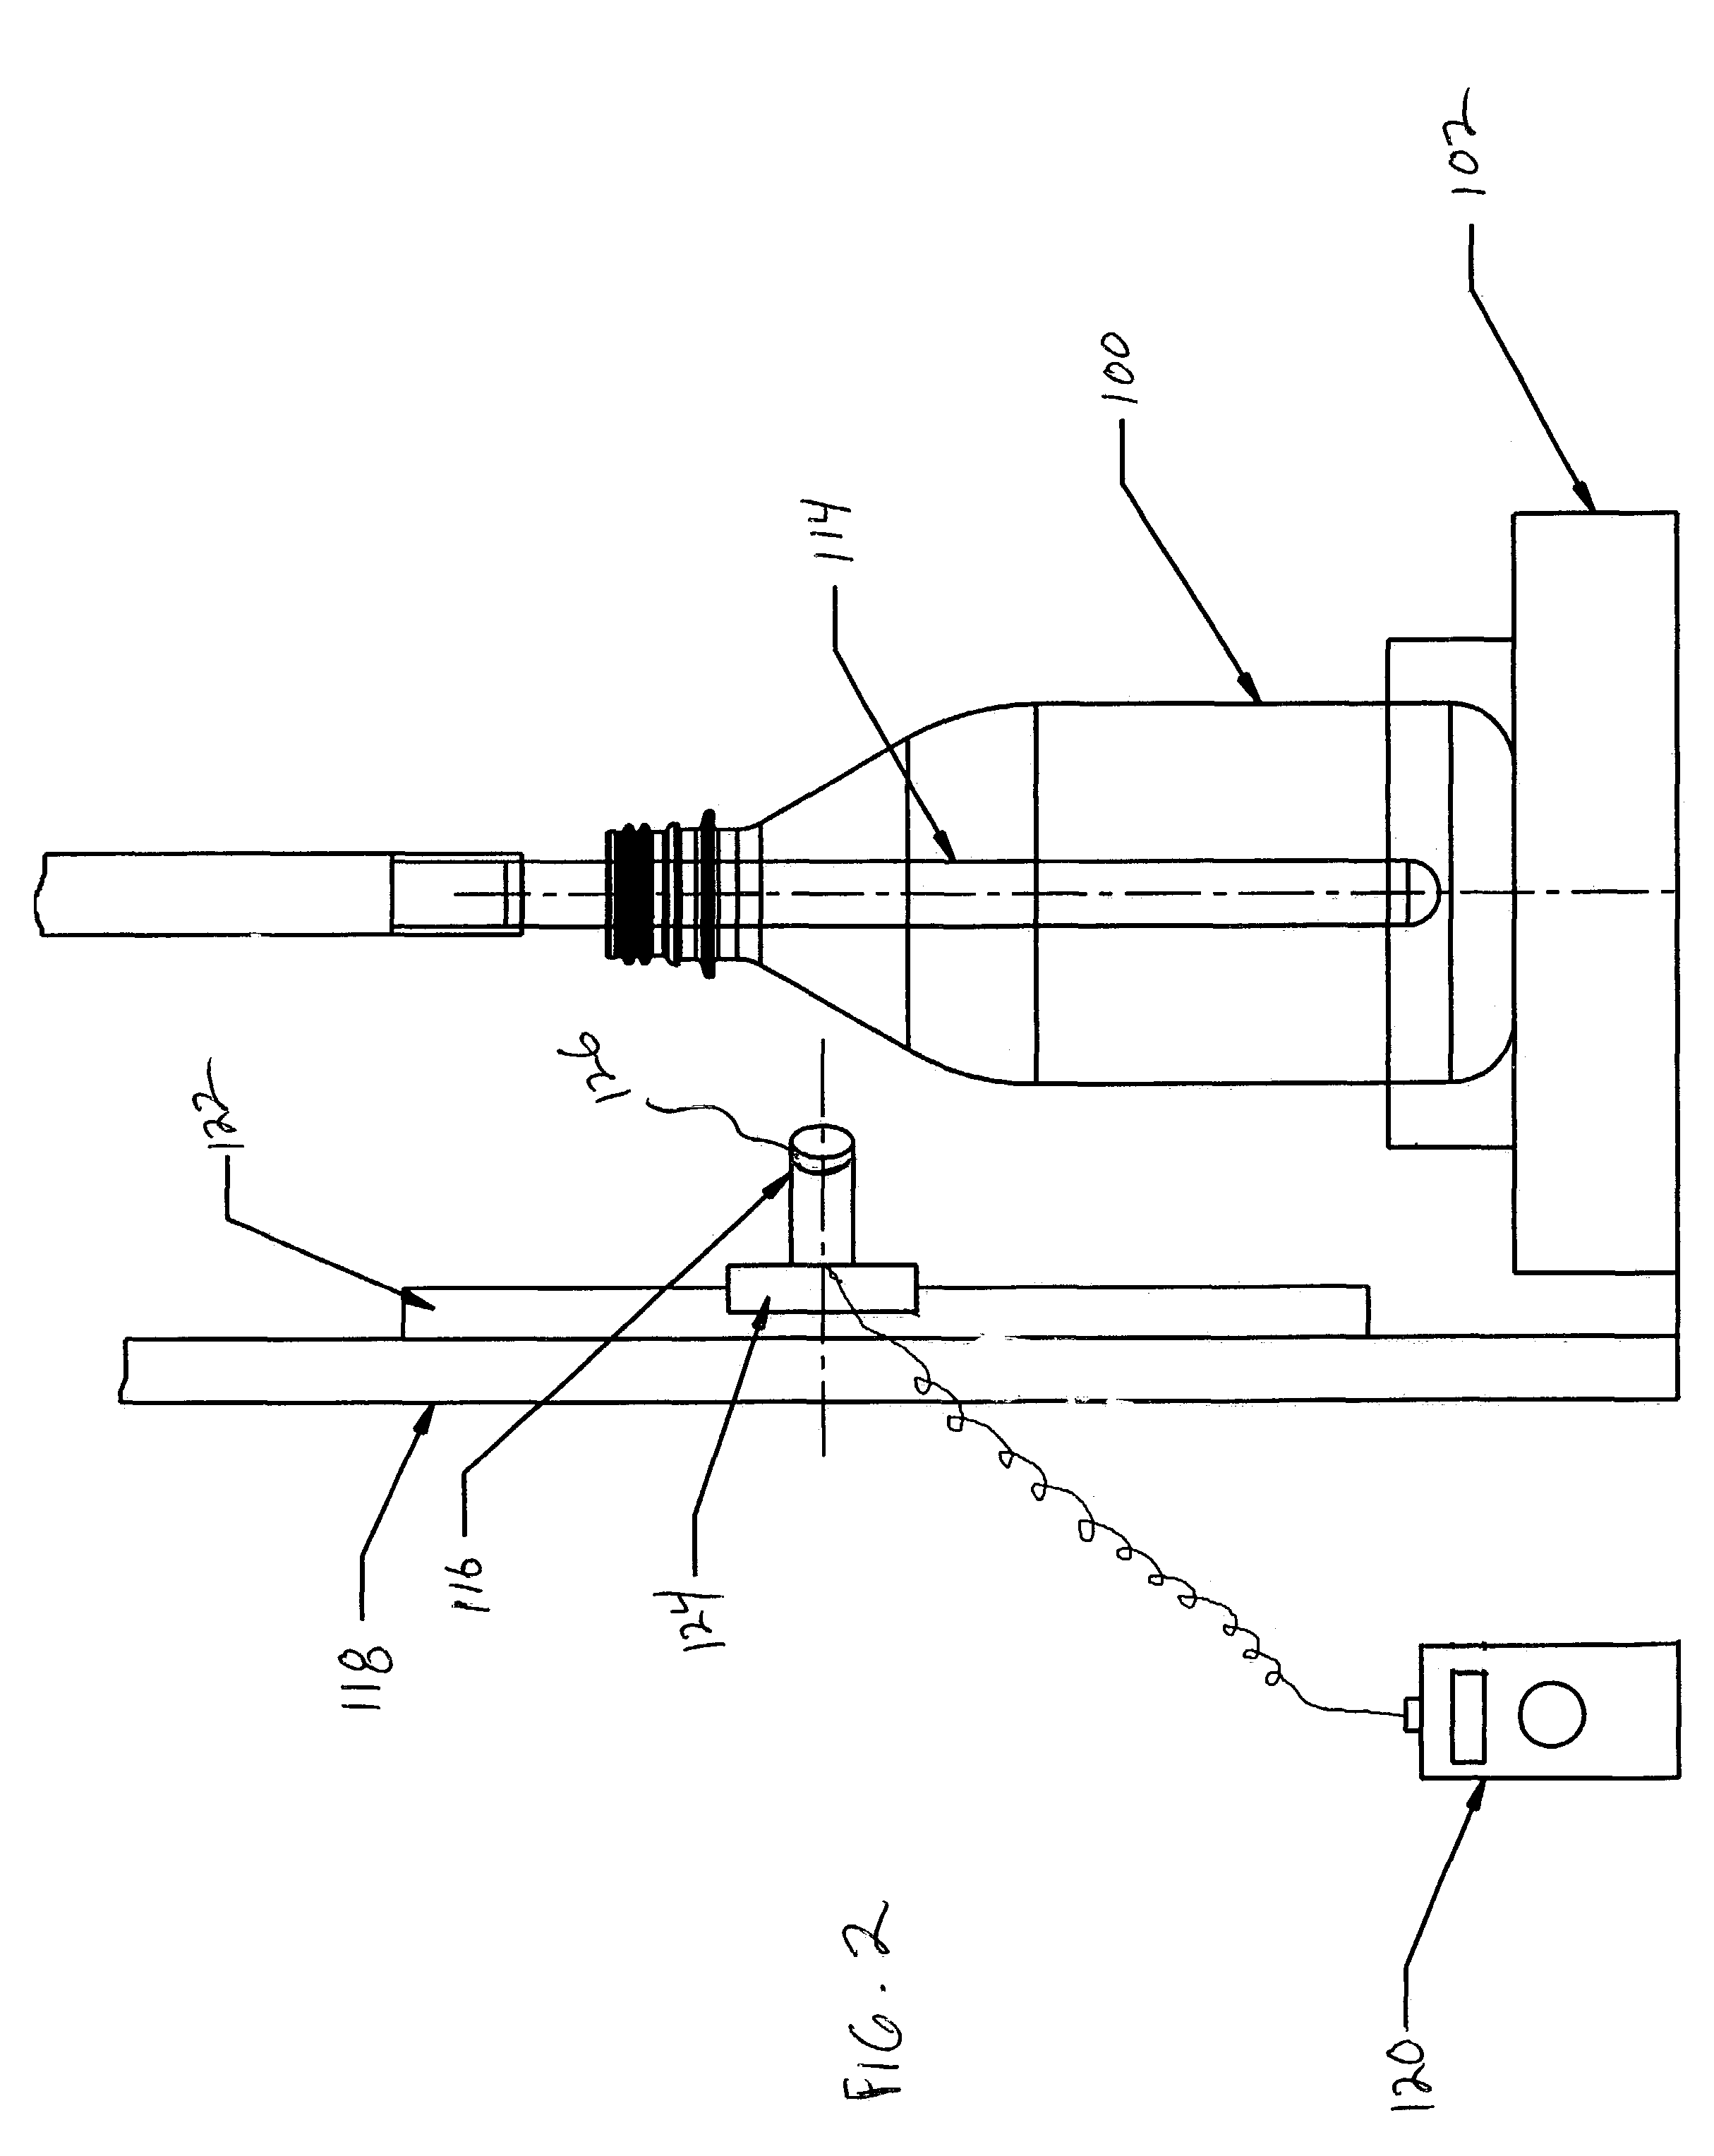 Process and apparatus for testing bottles